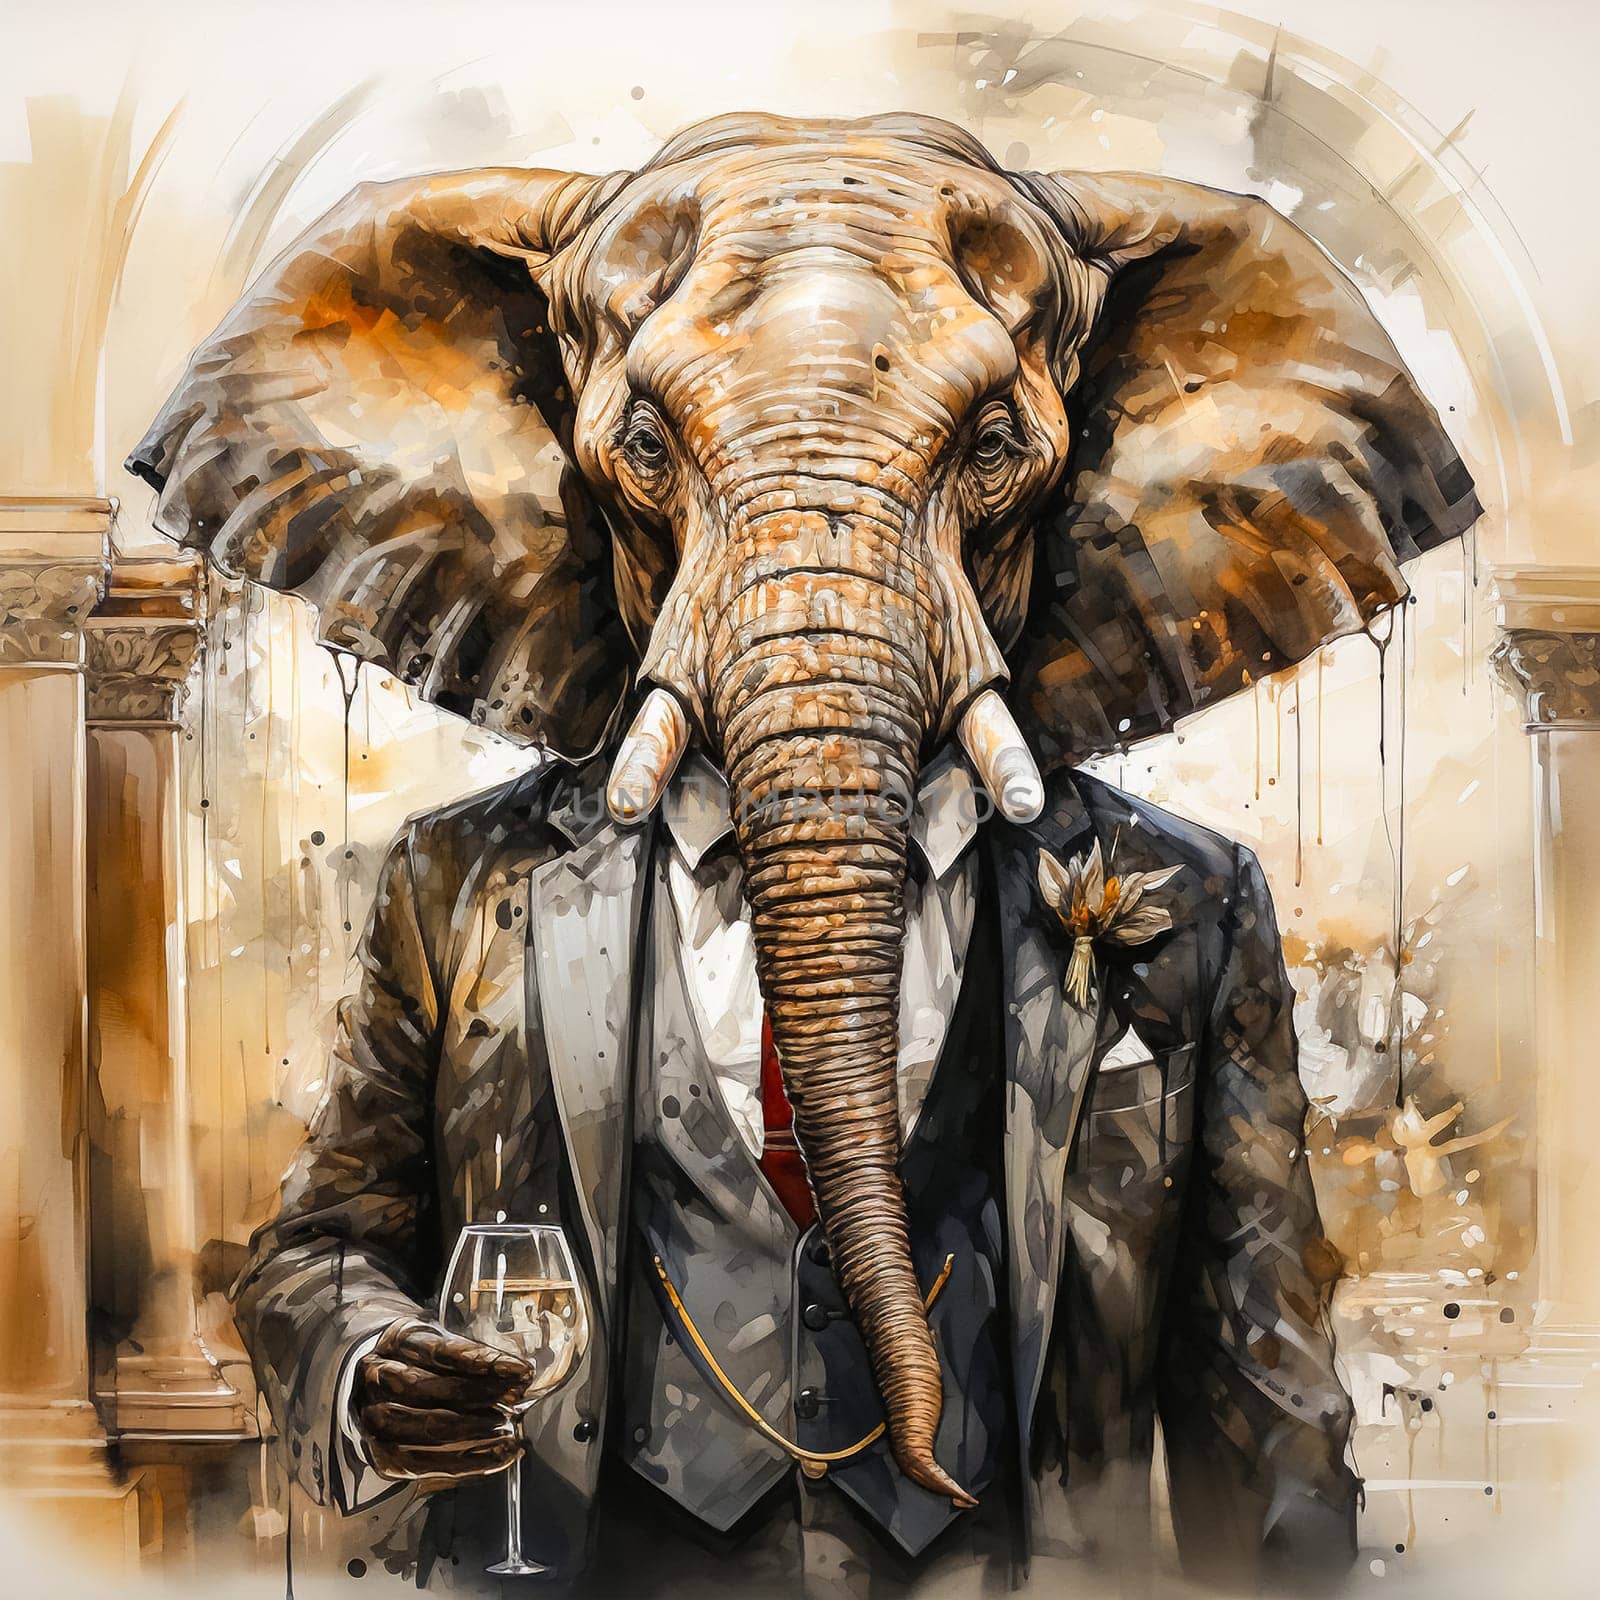 watercolor illustration of an elephant in a business suit by Alla_Morozova93